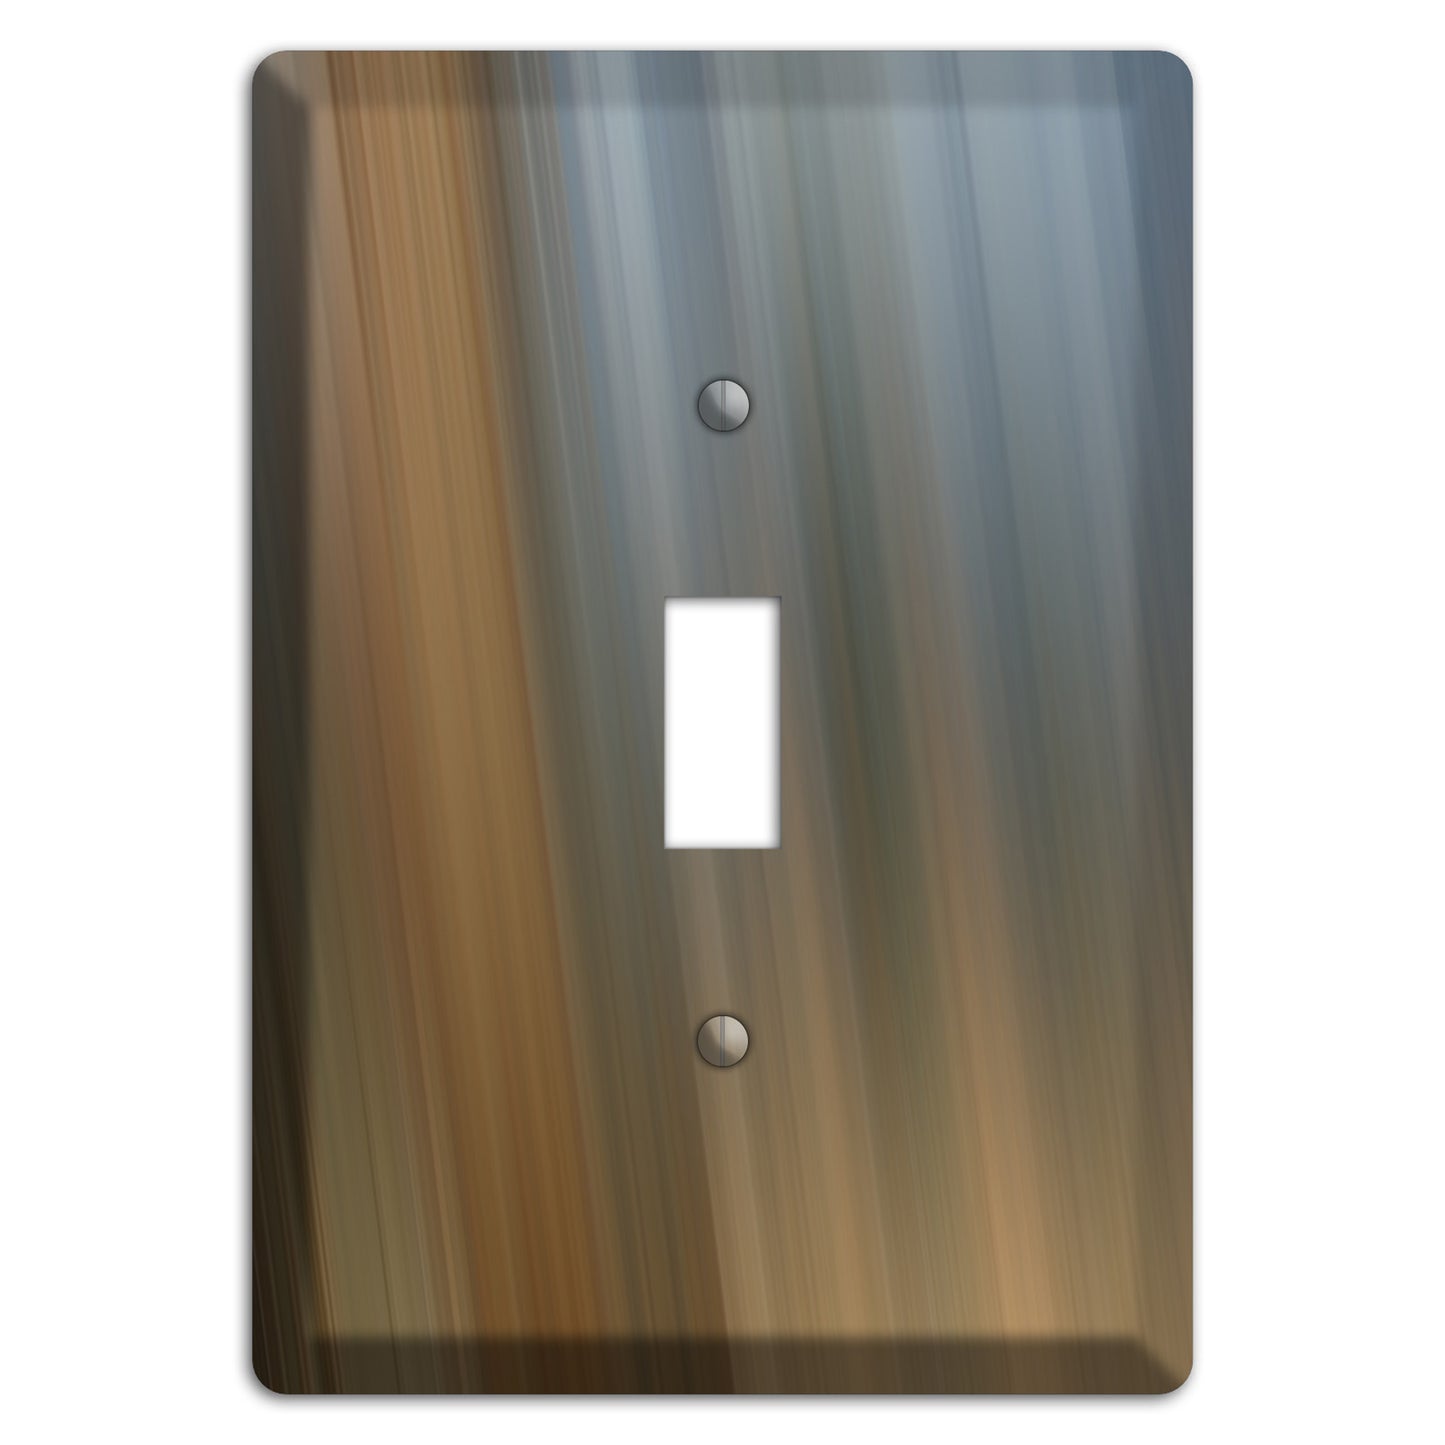 Brown and Blue-grey Ray of Light Cover Plates